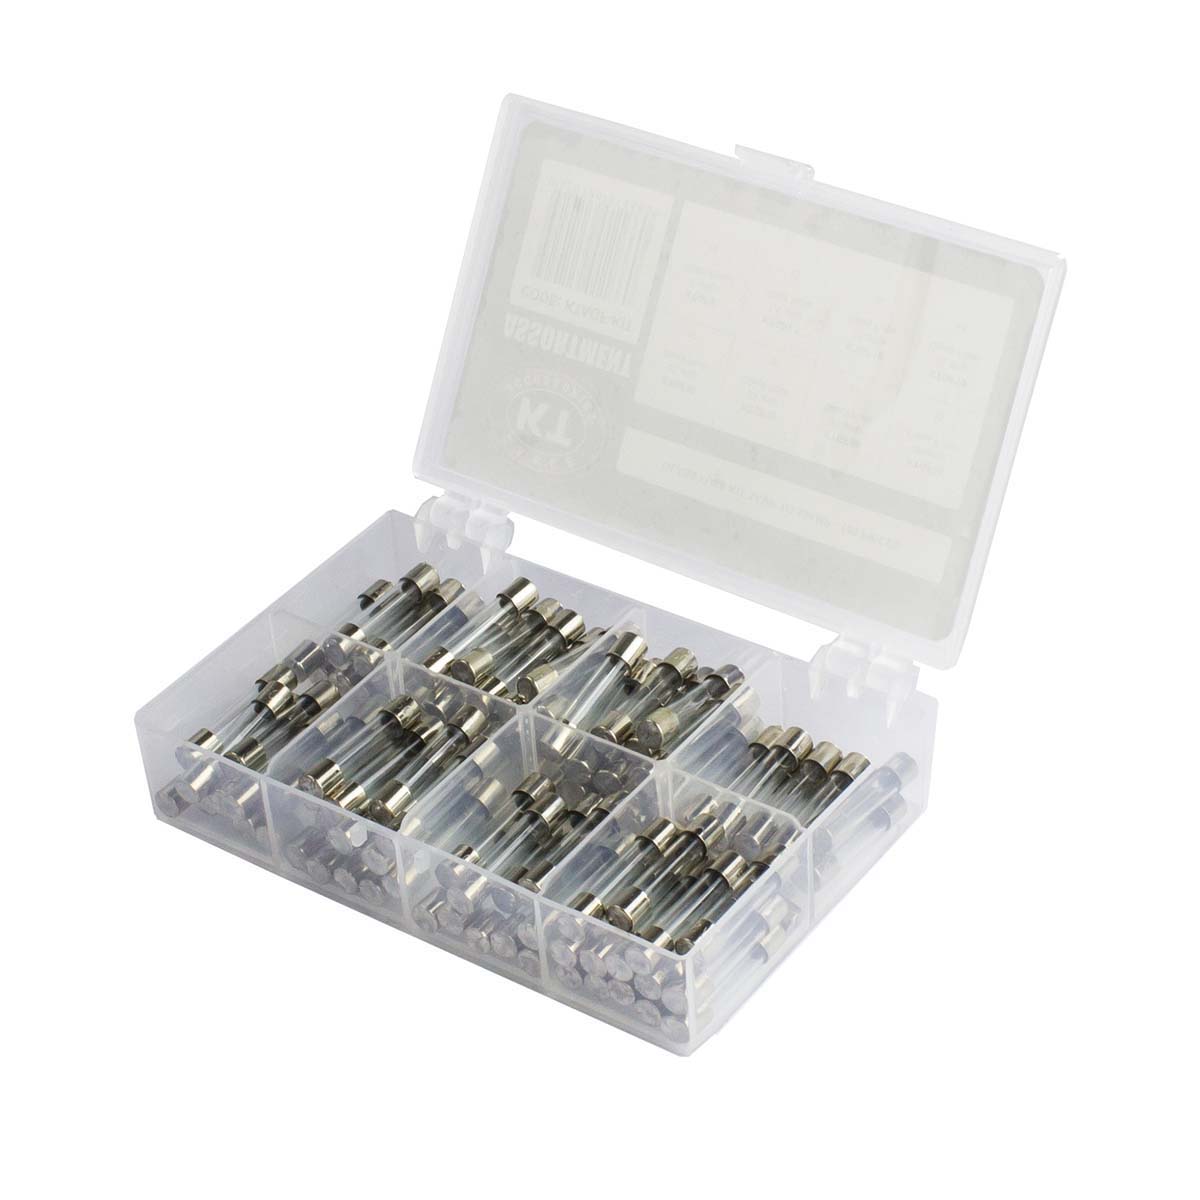 KT Cables Glass Fuse Kit, Assorted, 100 Pieces